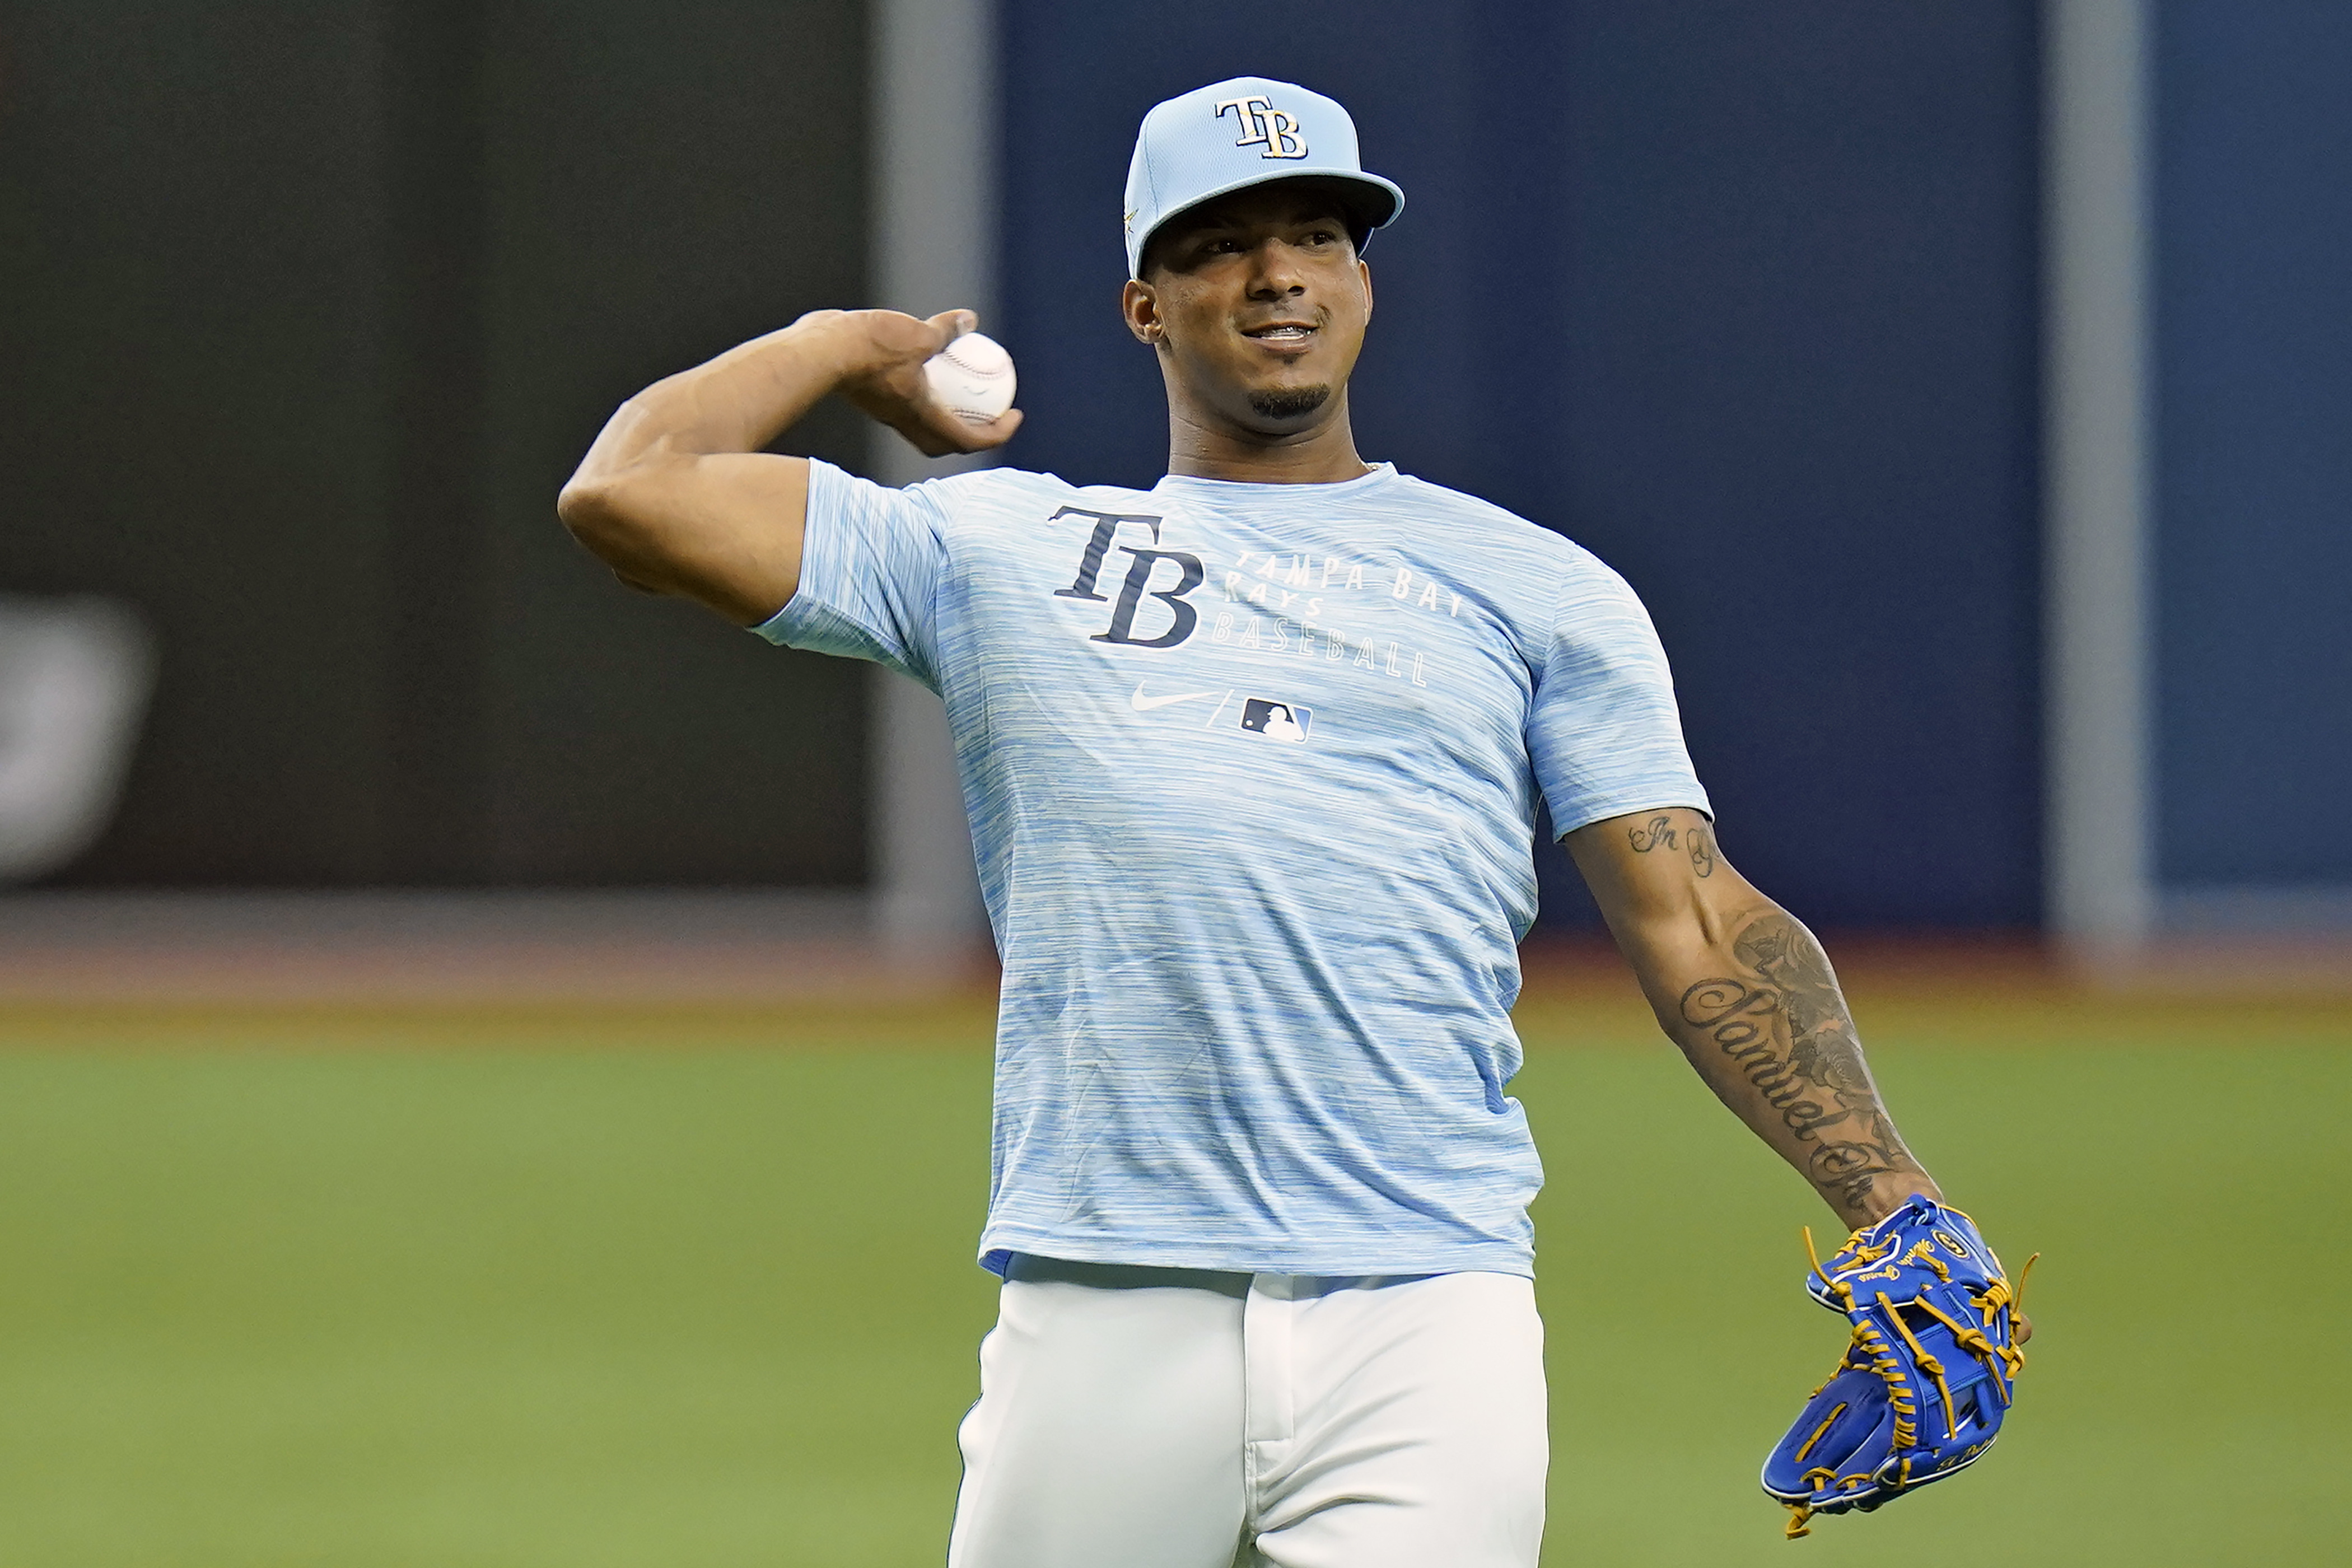 Major League Baseball's newest star shortstop, Wander Franco, is making an  impact for the Tampa Bay Rays - Inside the Knights